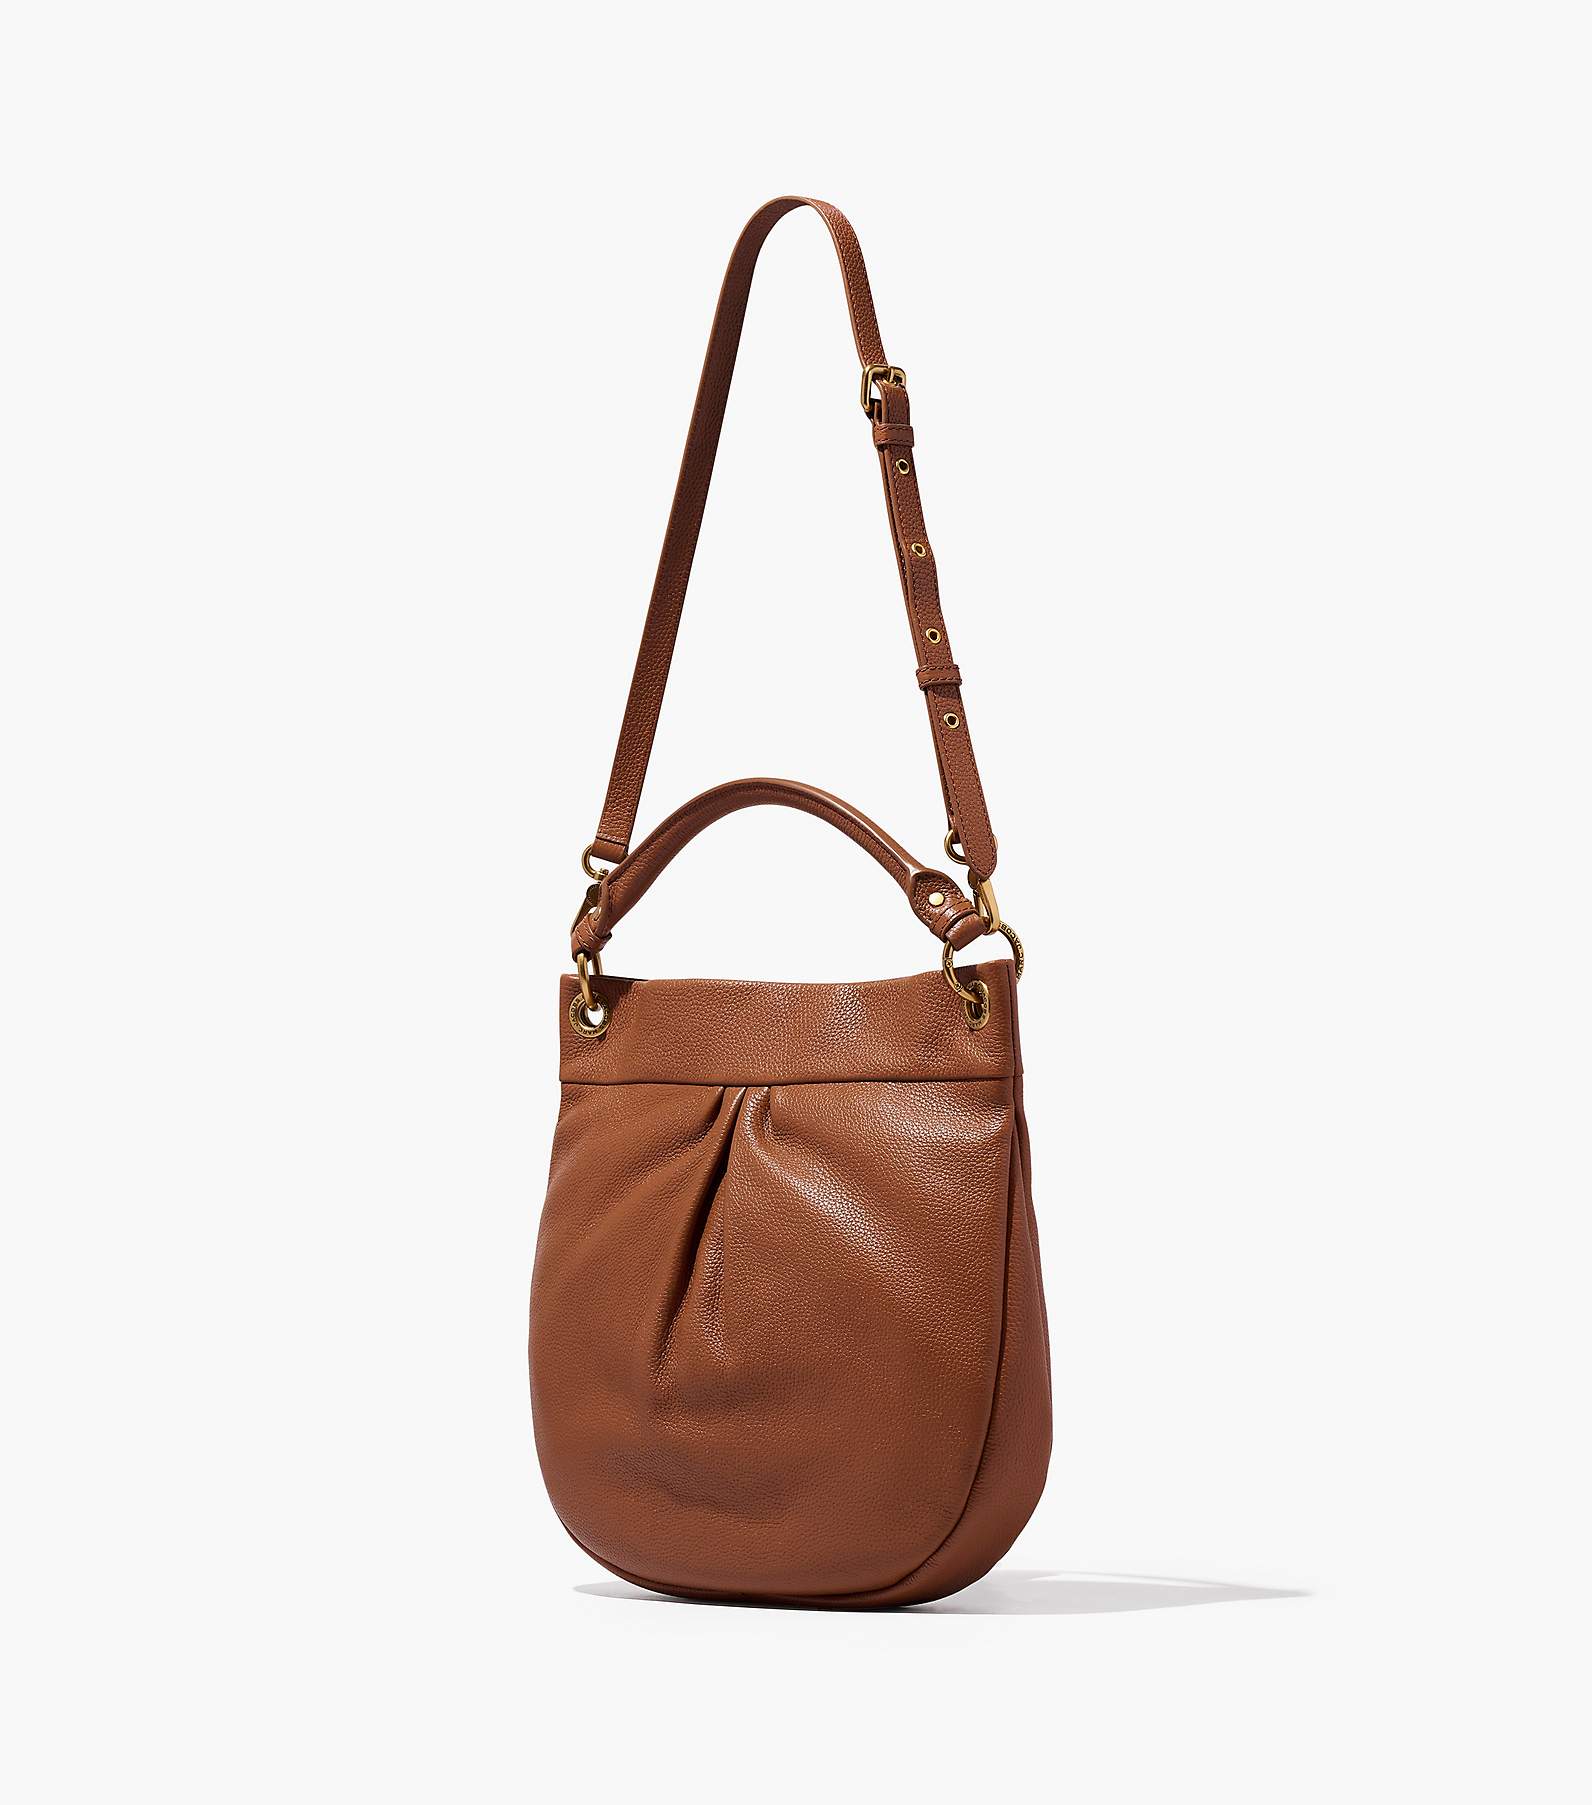 Marc Jacobs Re-Edition Hillier Hobo Bag - Brown